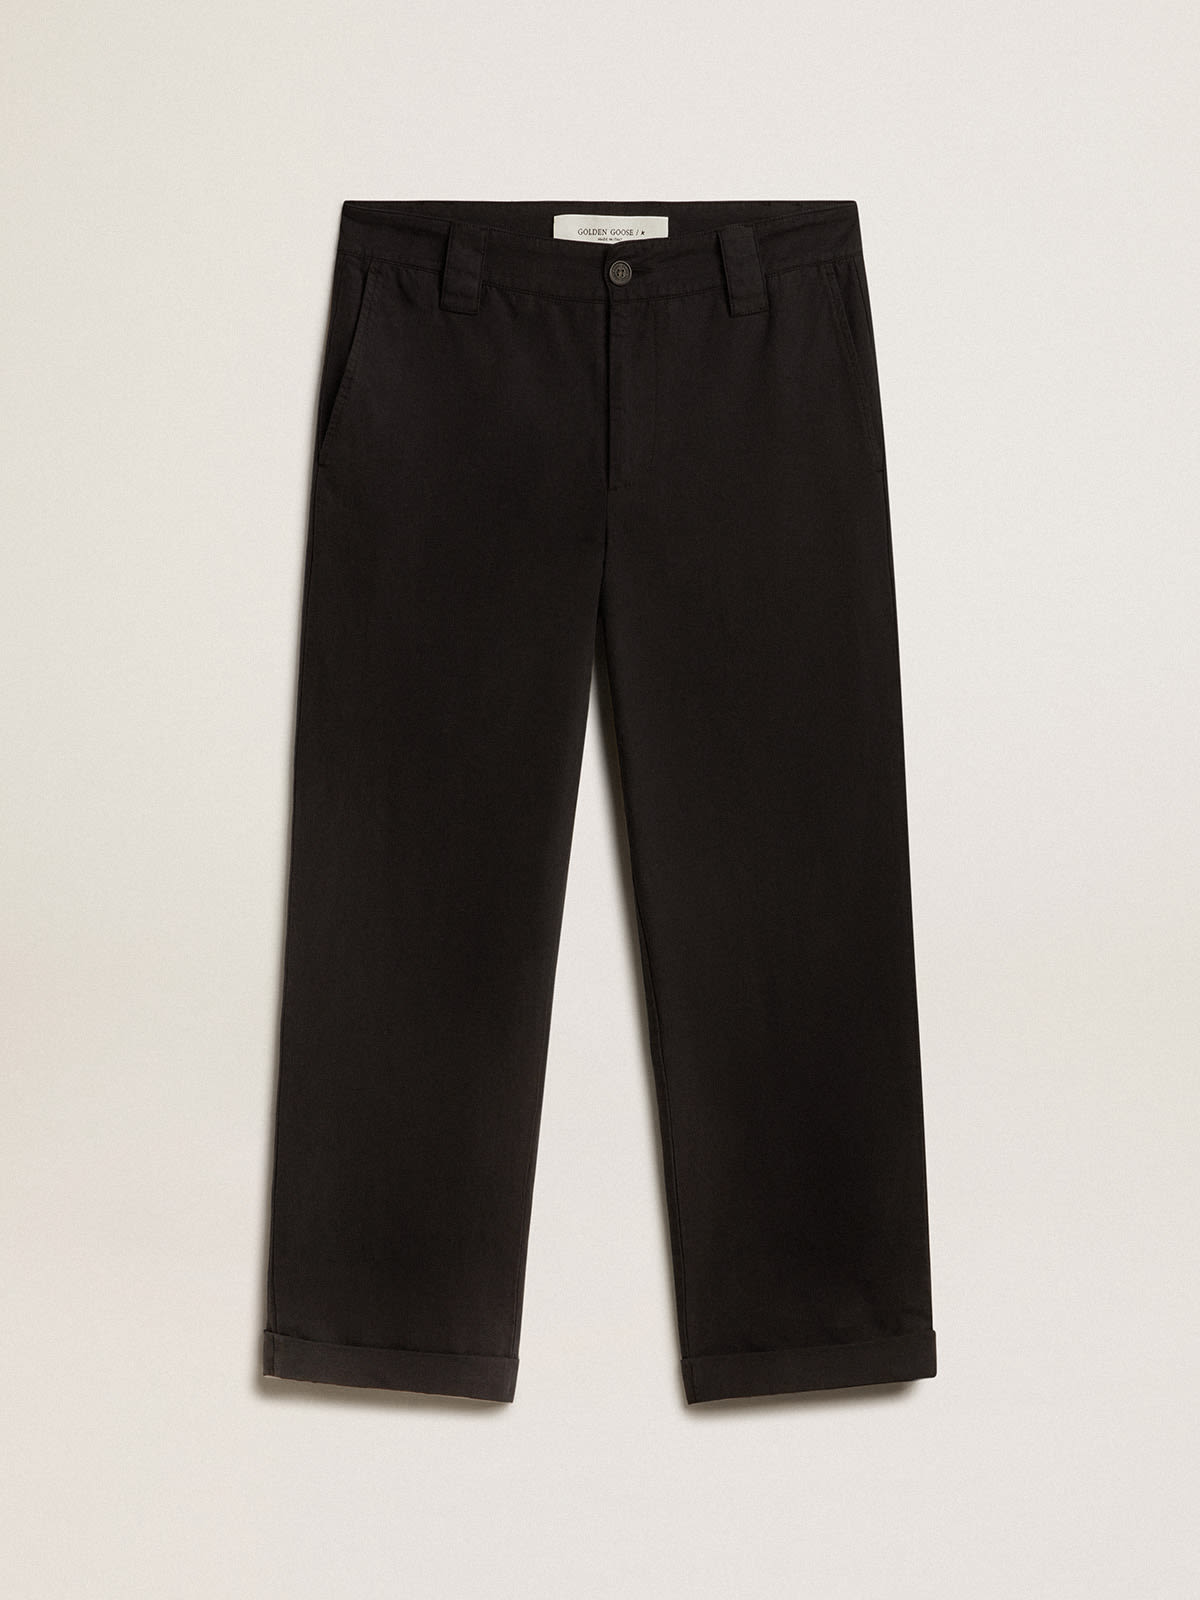 Mens trousers: pants and jeans for men